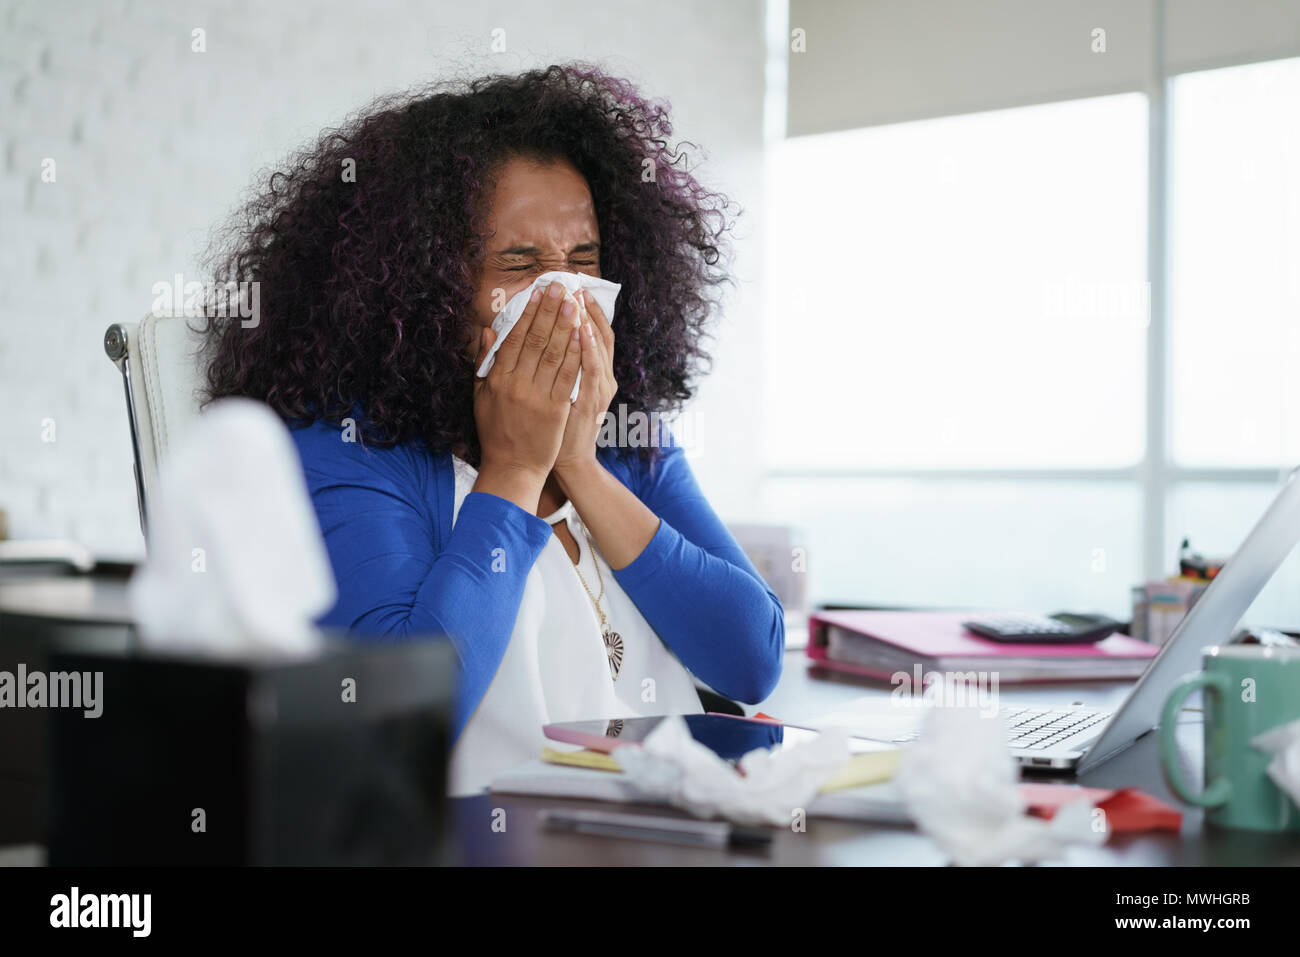 Sick african american girl working from home office. Ill young black woman with cold, sitting at desk with laptop computer and sneezing for allergy. Stock Photo